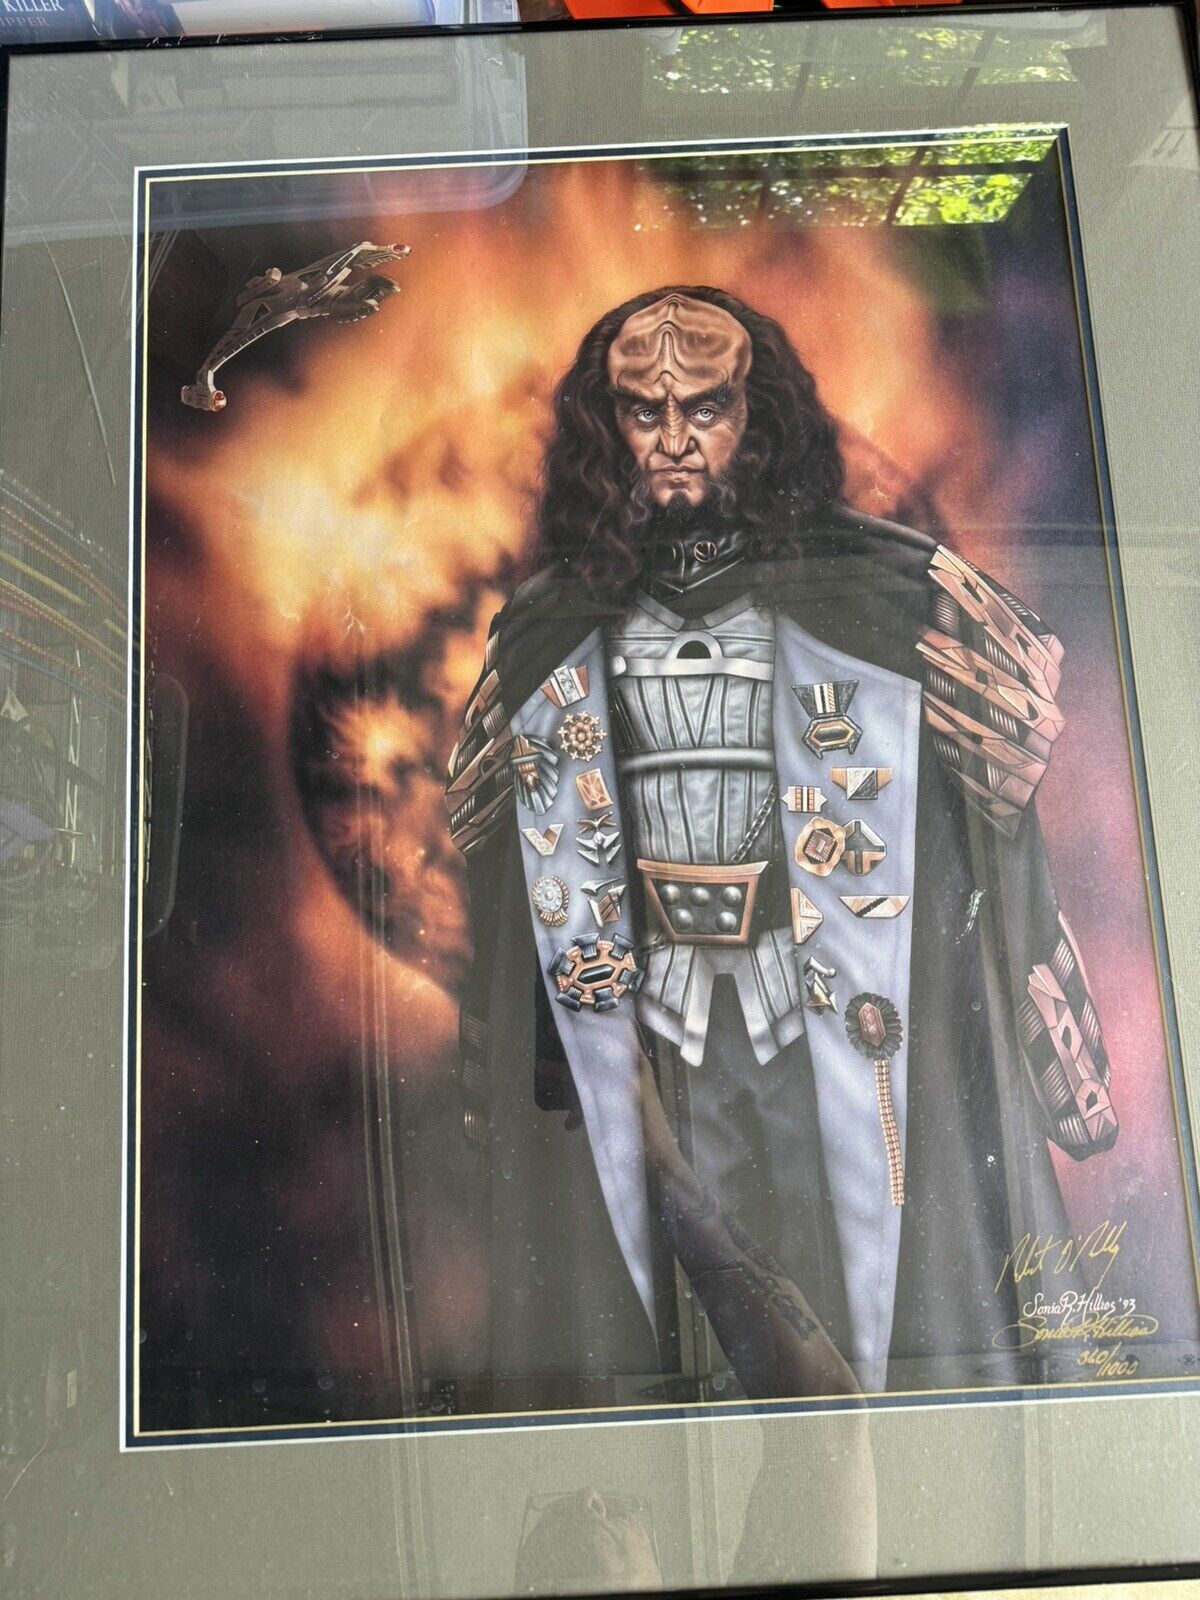 Star Trek lithograph of Gowron Signed by artist & Robert O'Reilly #360 of 1000